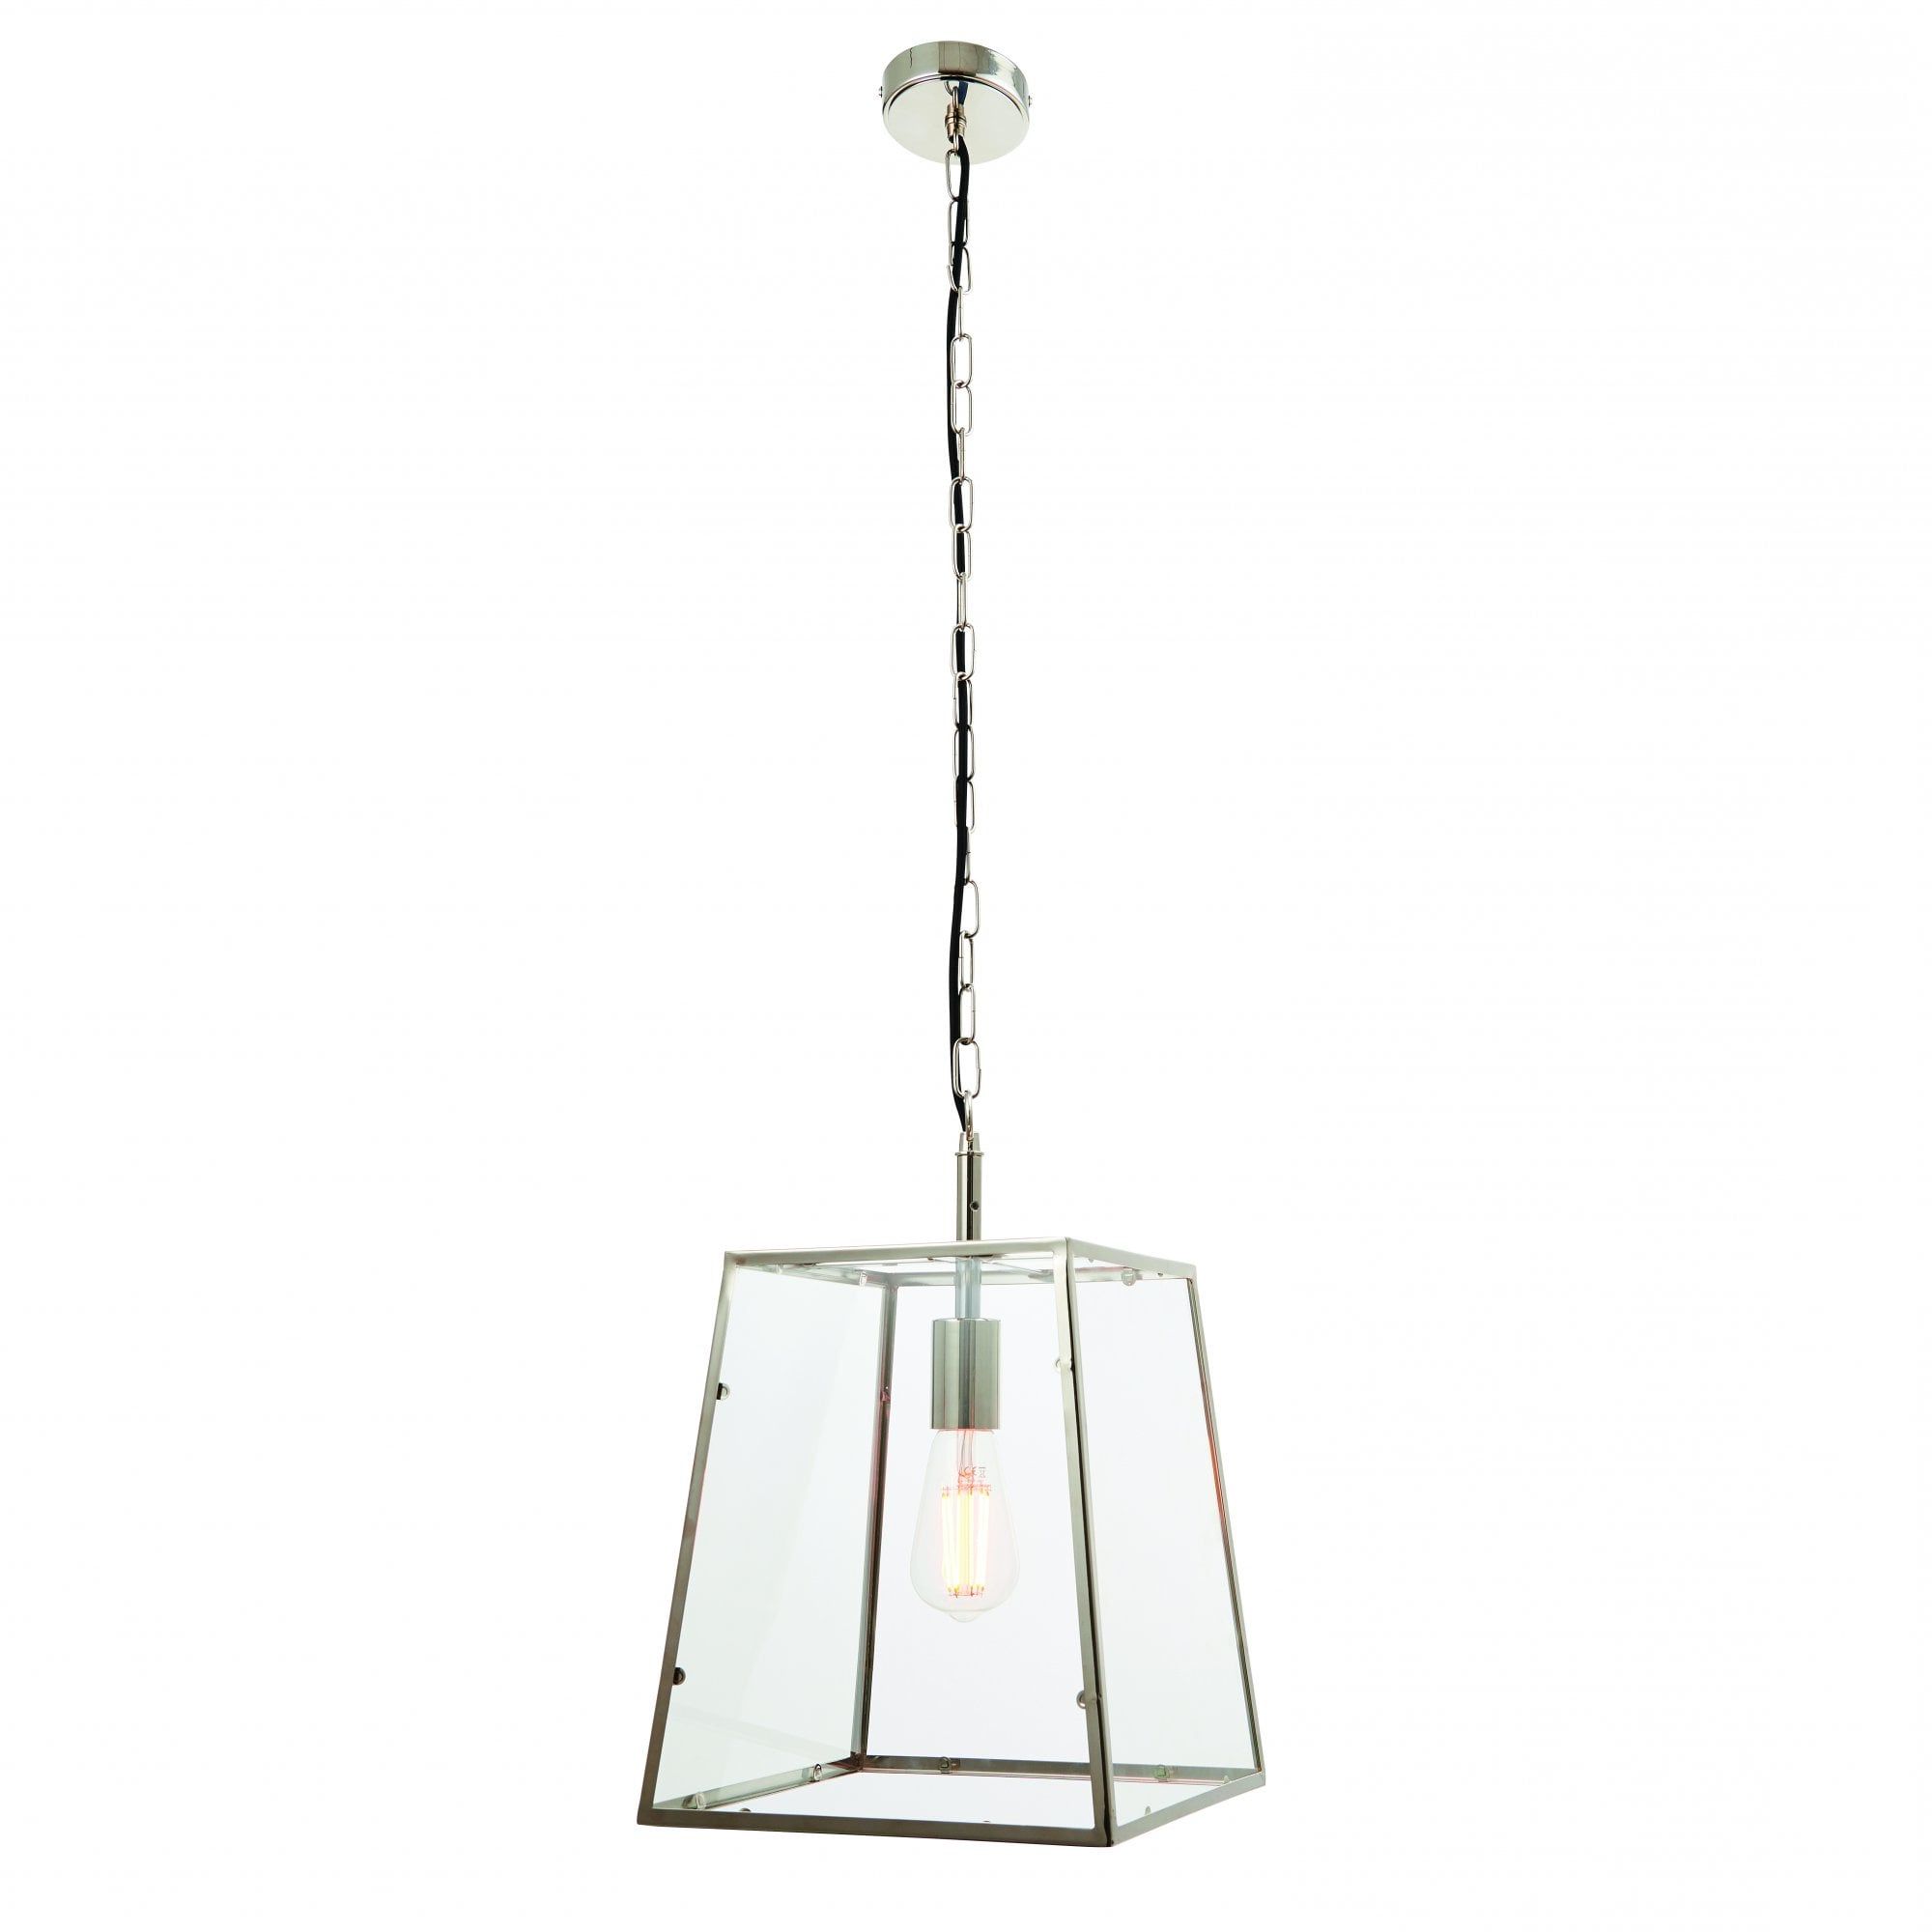 Fashionable Ceiling Lantern In Polished Nickel With Clear Glass In Transparent Glass Lantern Chandeliers (View 3 of 15)